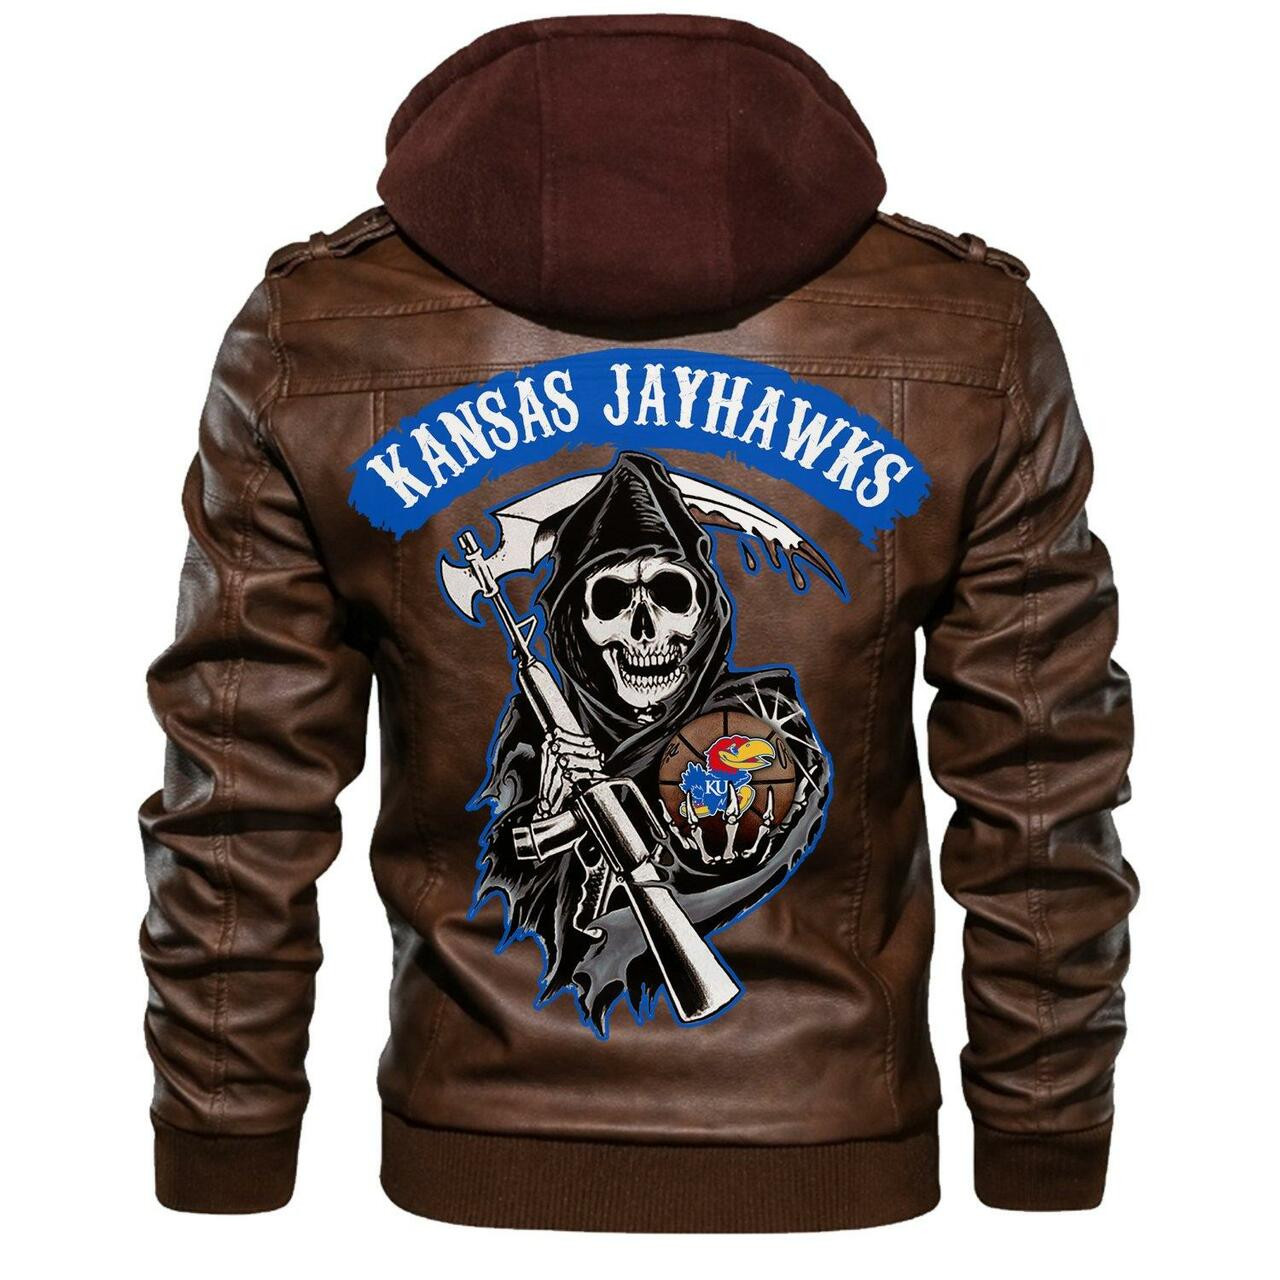 You can find Leather Jacket online at a great price 190